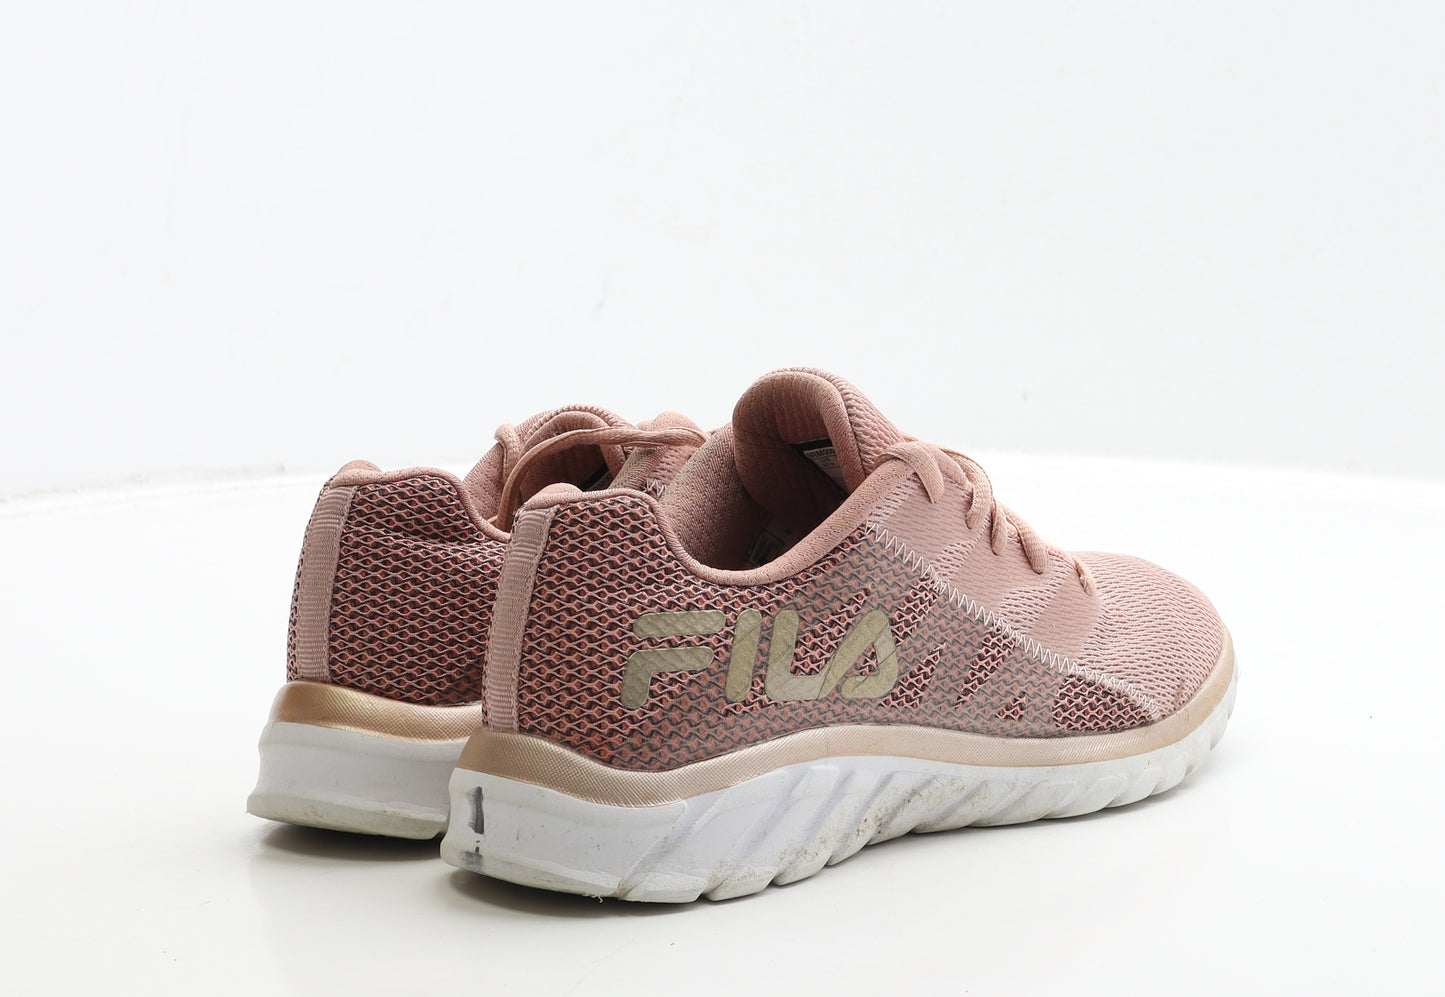 FILA Womens Pink Polyester Trainer UK 4 37.5